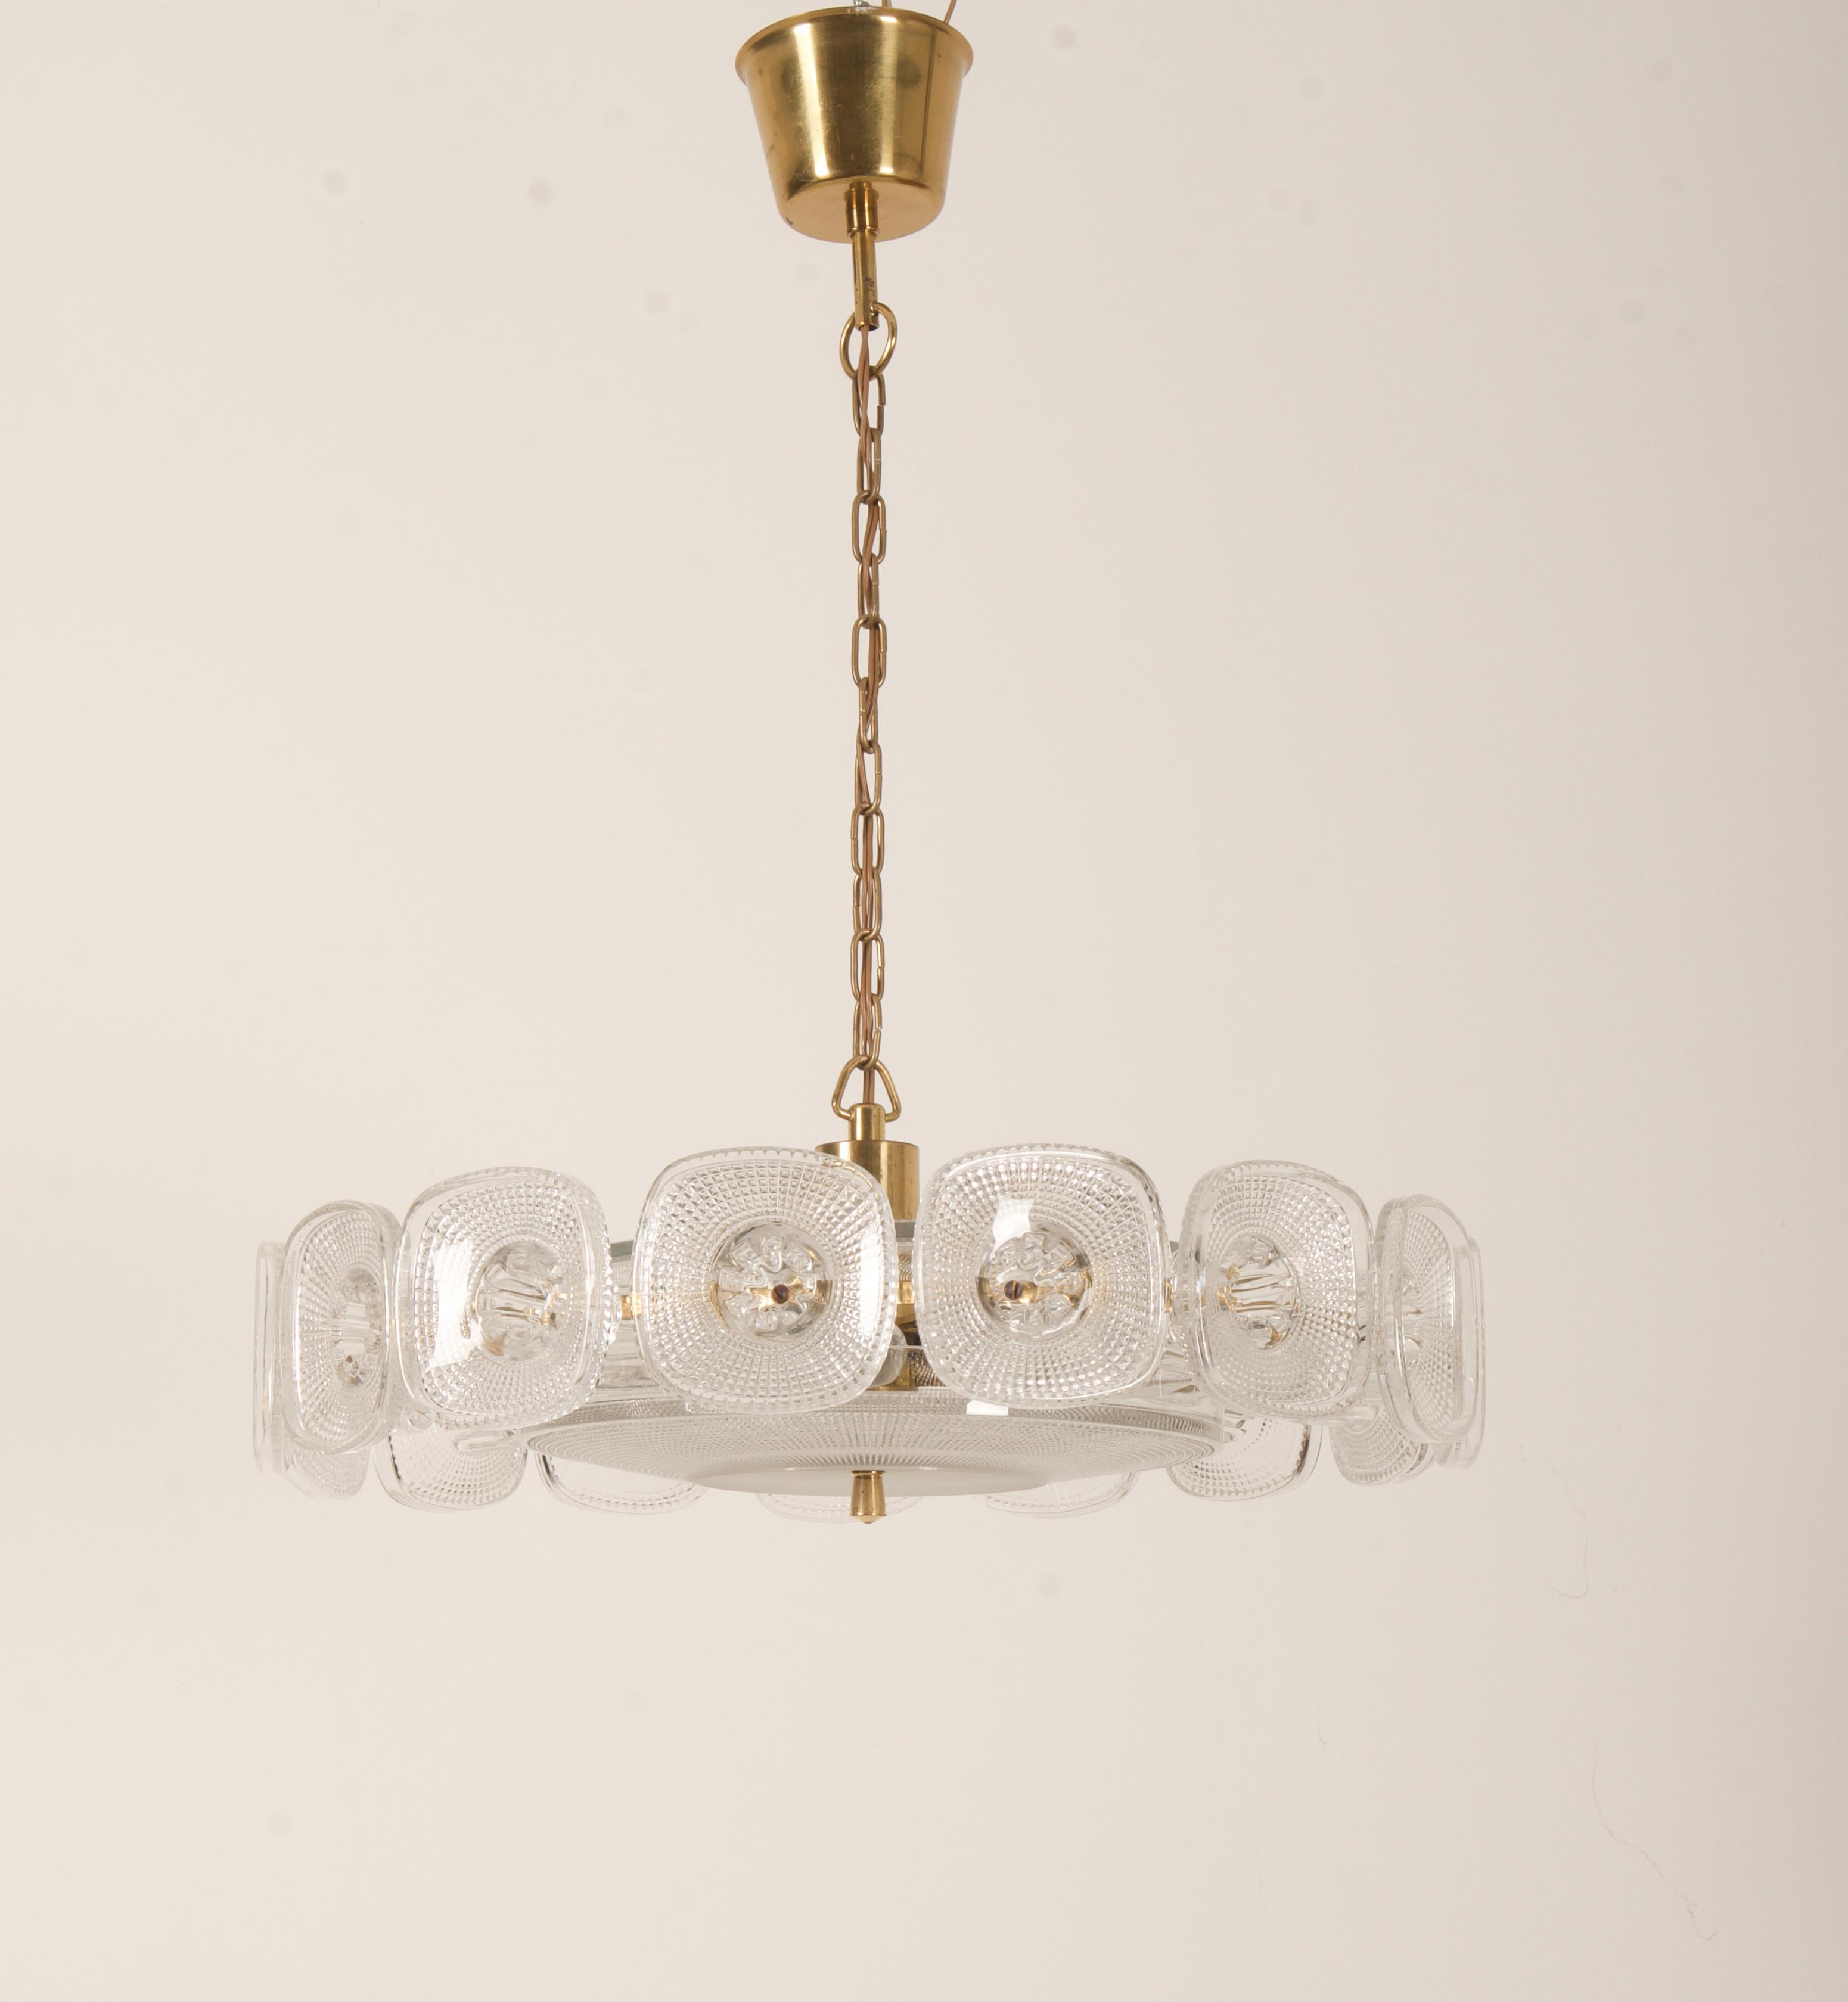 Brass construction gold-plated, fitted with five E14 sockets. The decor of ornament in pressed glass, designed by Kjell Blomberg for Gullaskrufs glasbruk in Sweden in the 1960s.